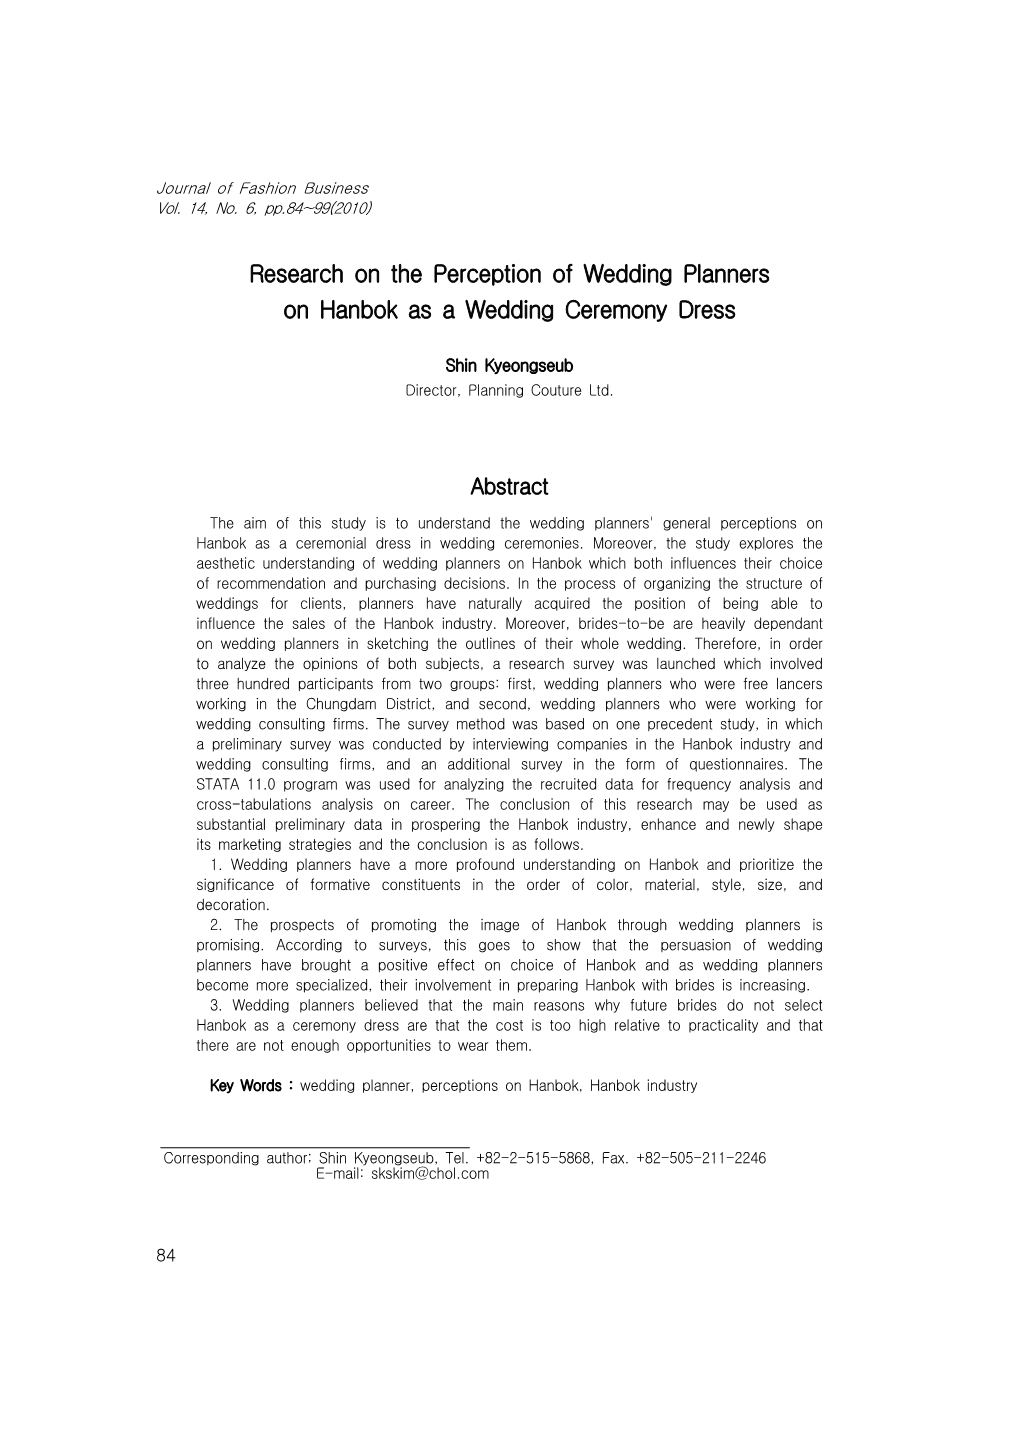 Research on the Perception of Wedding Planners on Hanbok As a Wedding Ceremony Dress